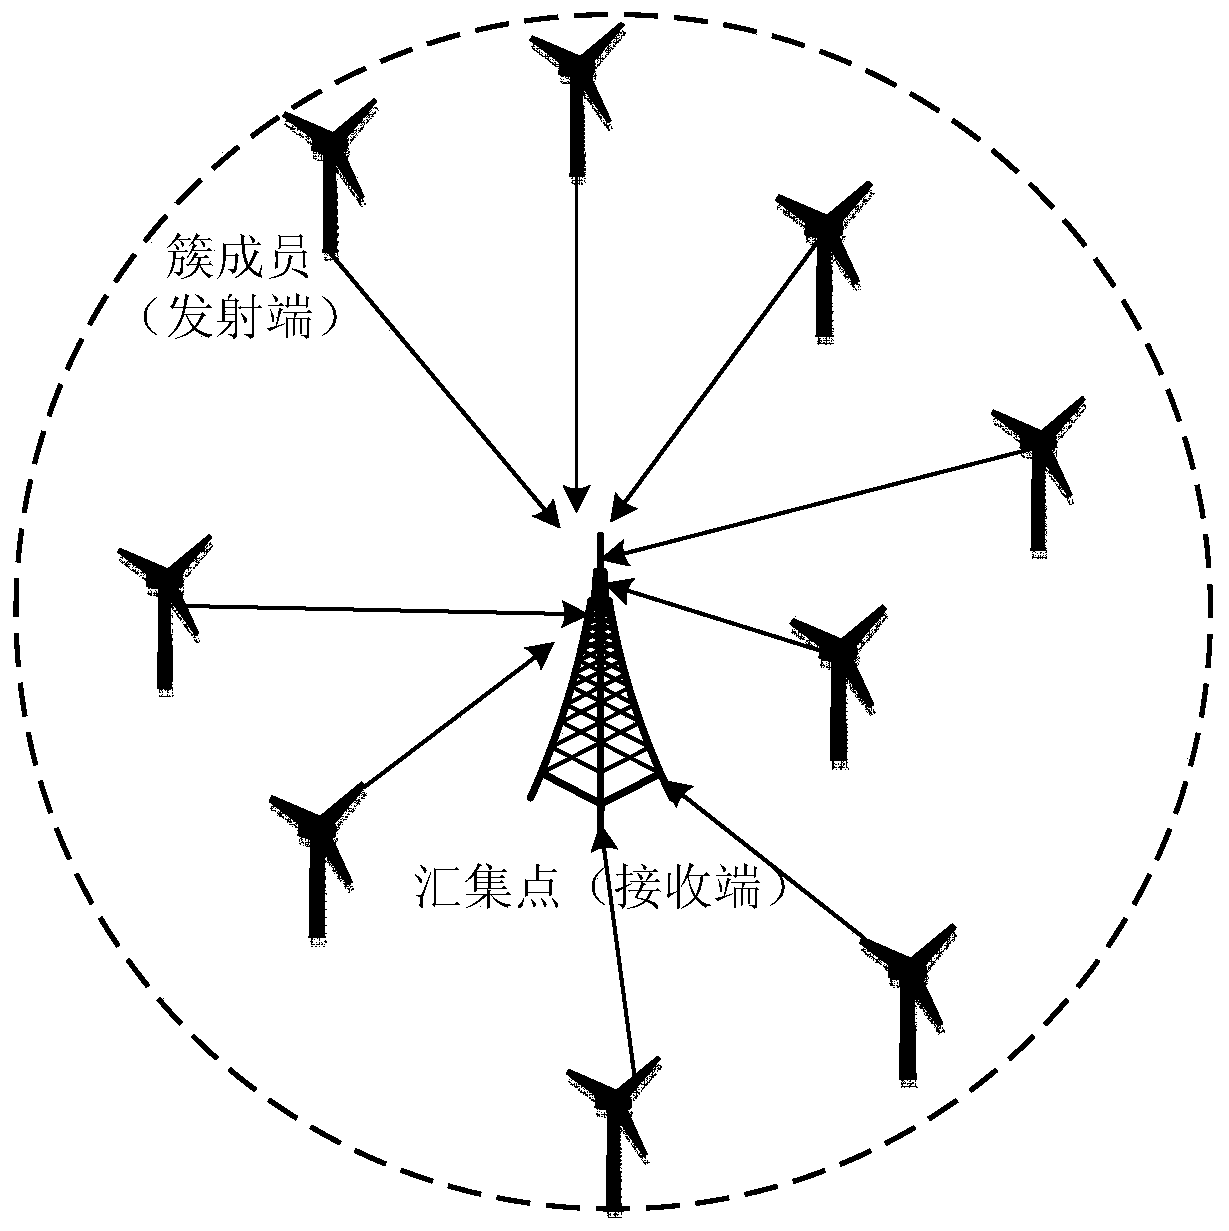 A wireless network-based vibration status monitoring system for wind turbines